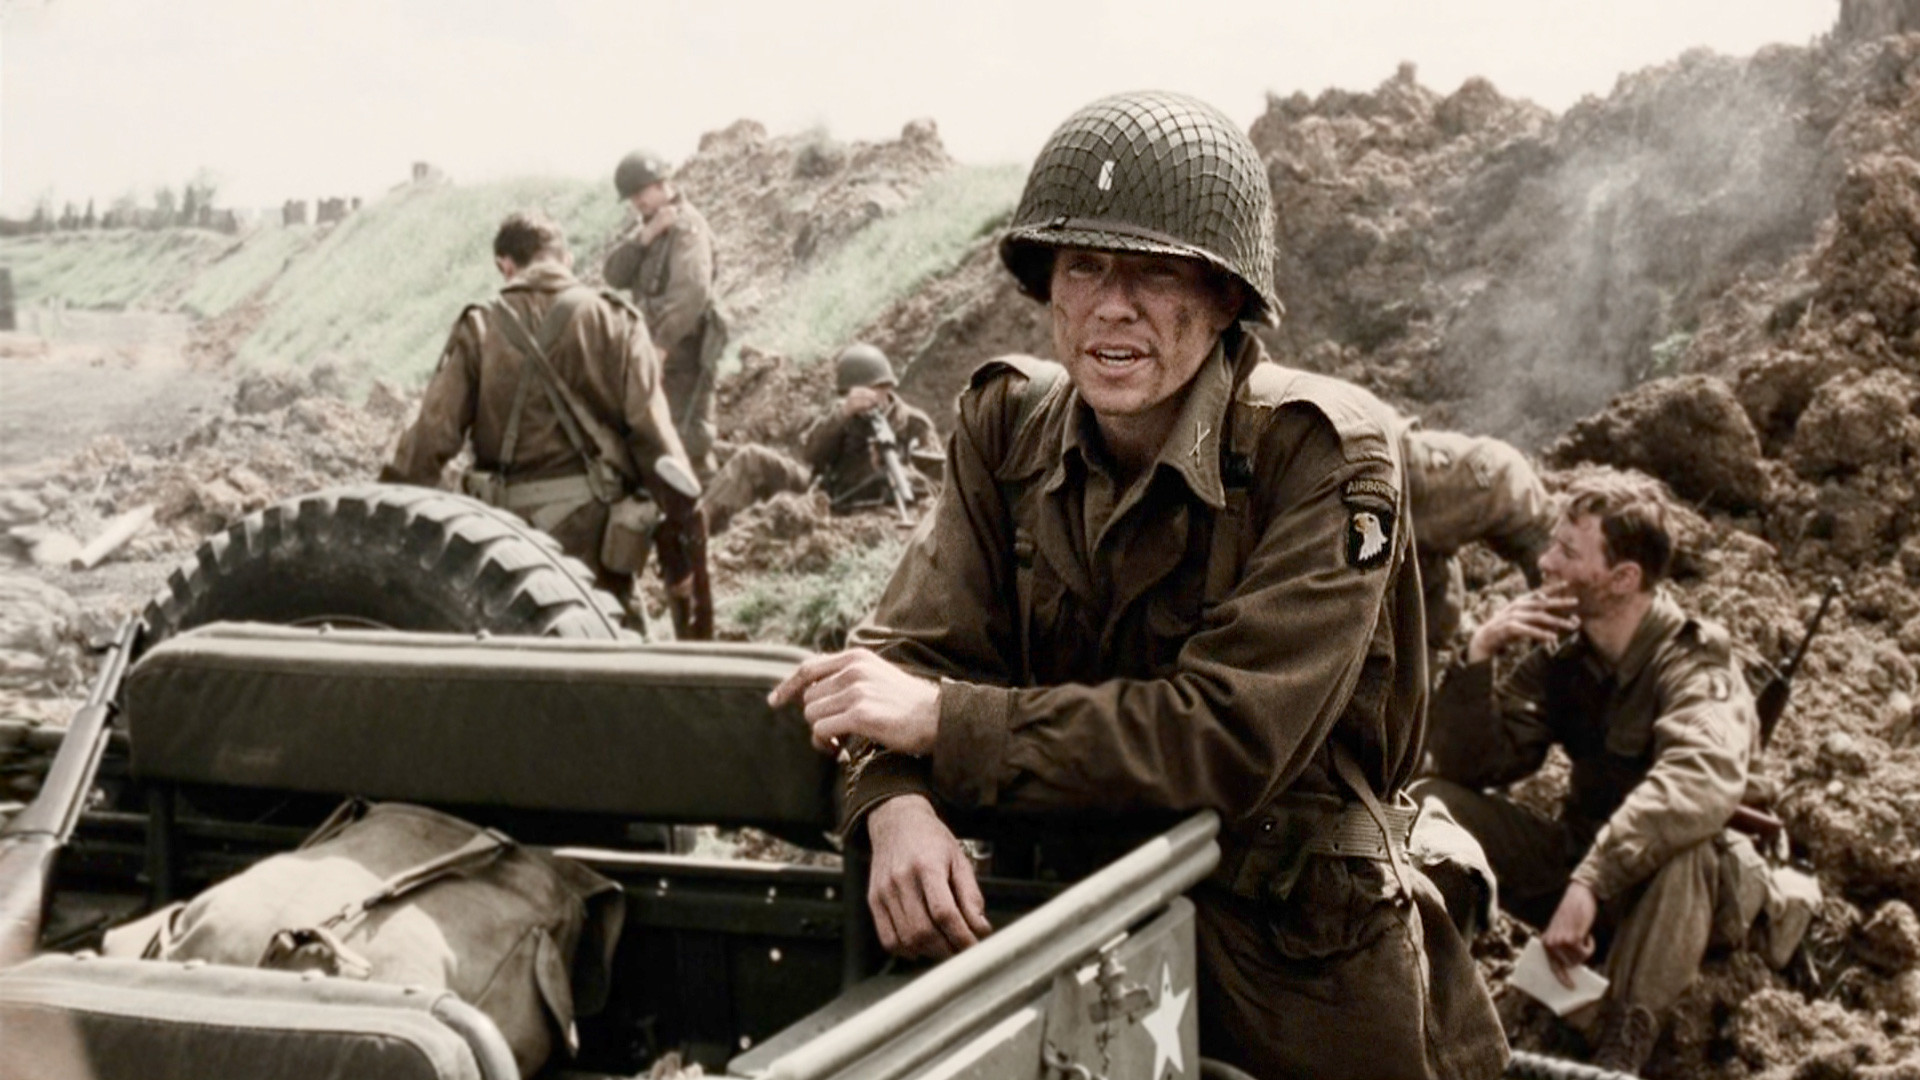 Wallpaper Damian Lewis Band of Brothers Head Hat Headgear Background   Download Free Image